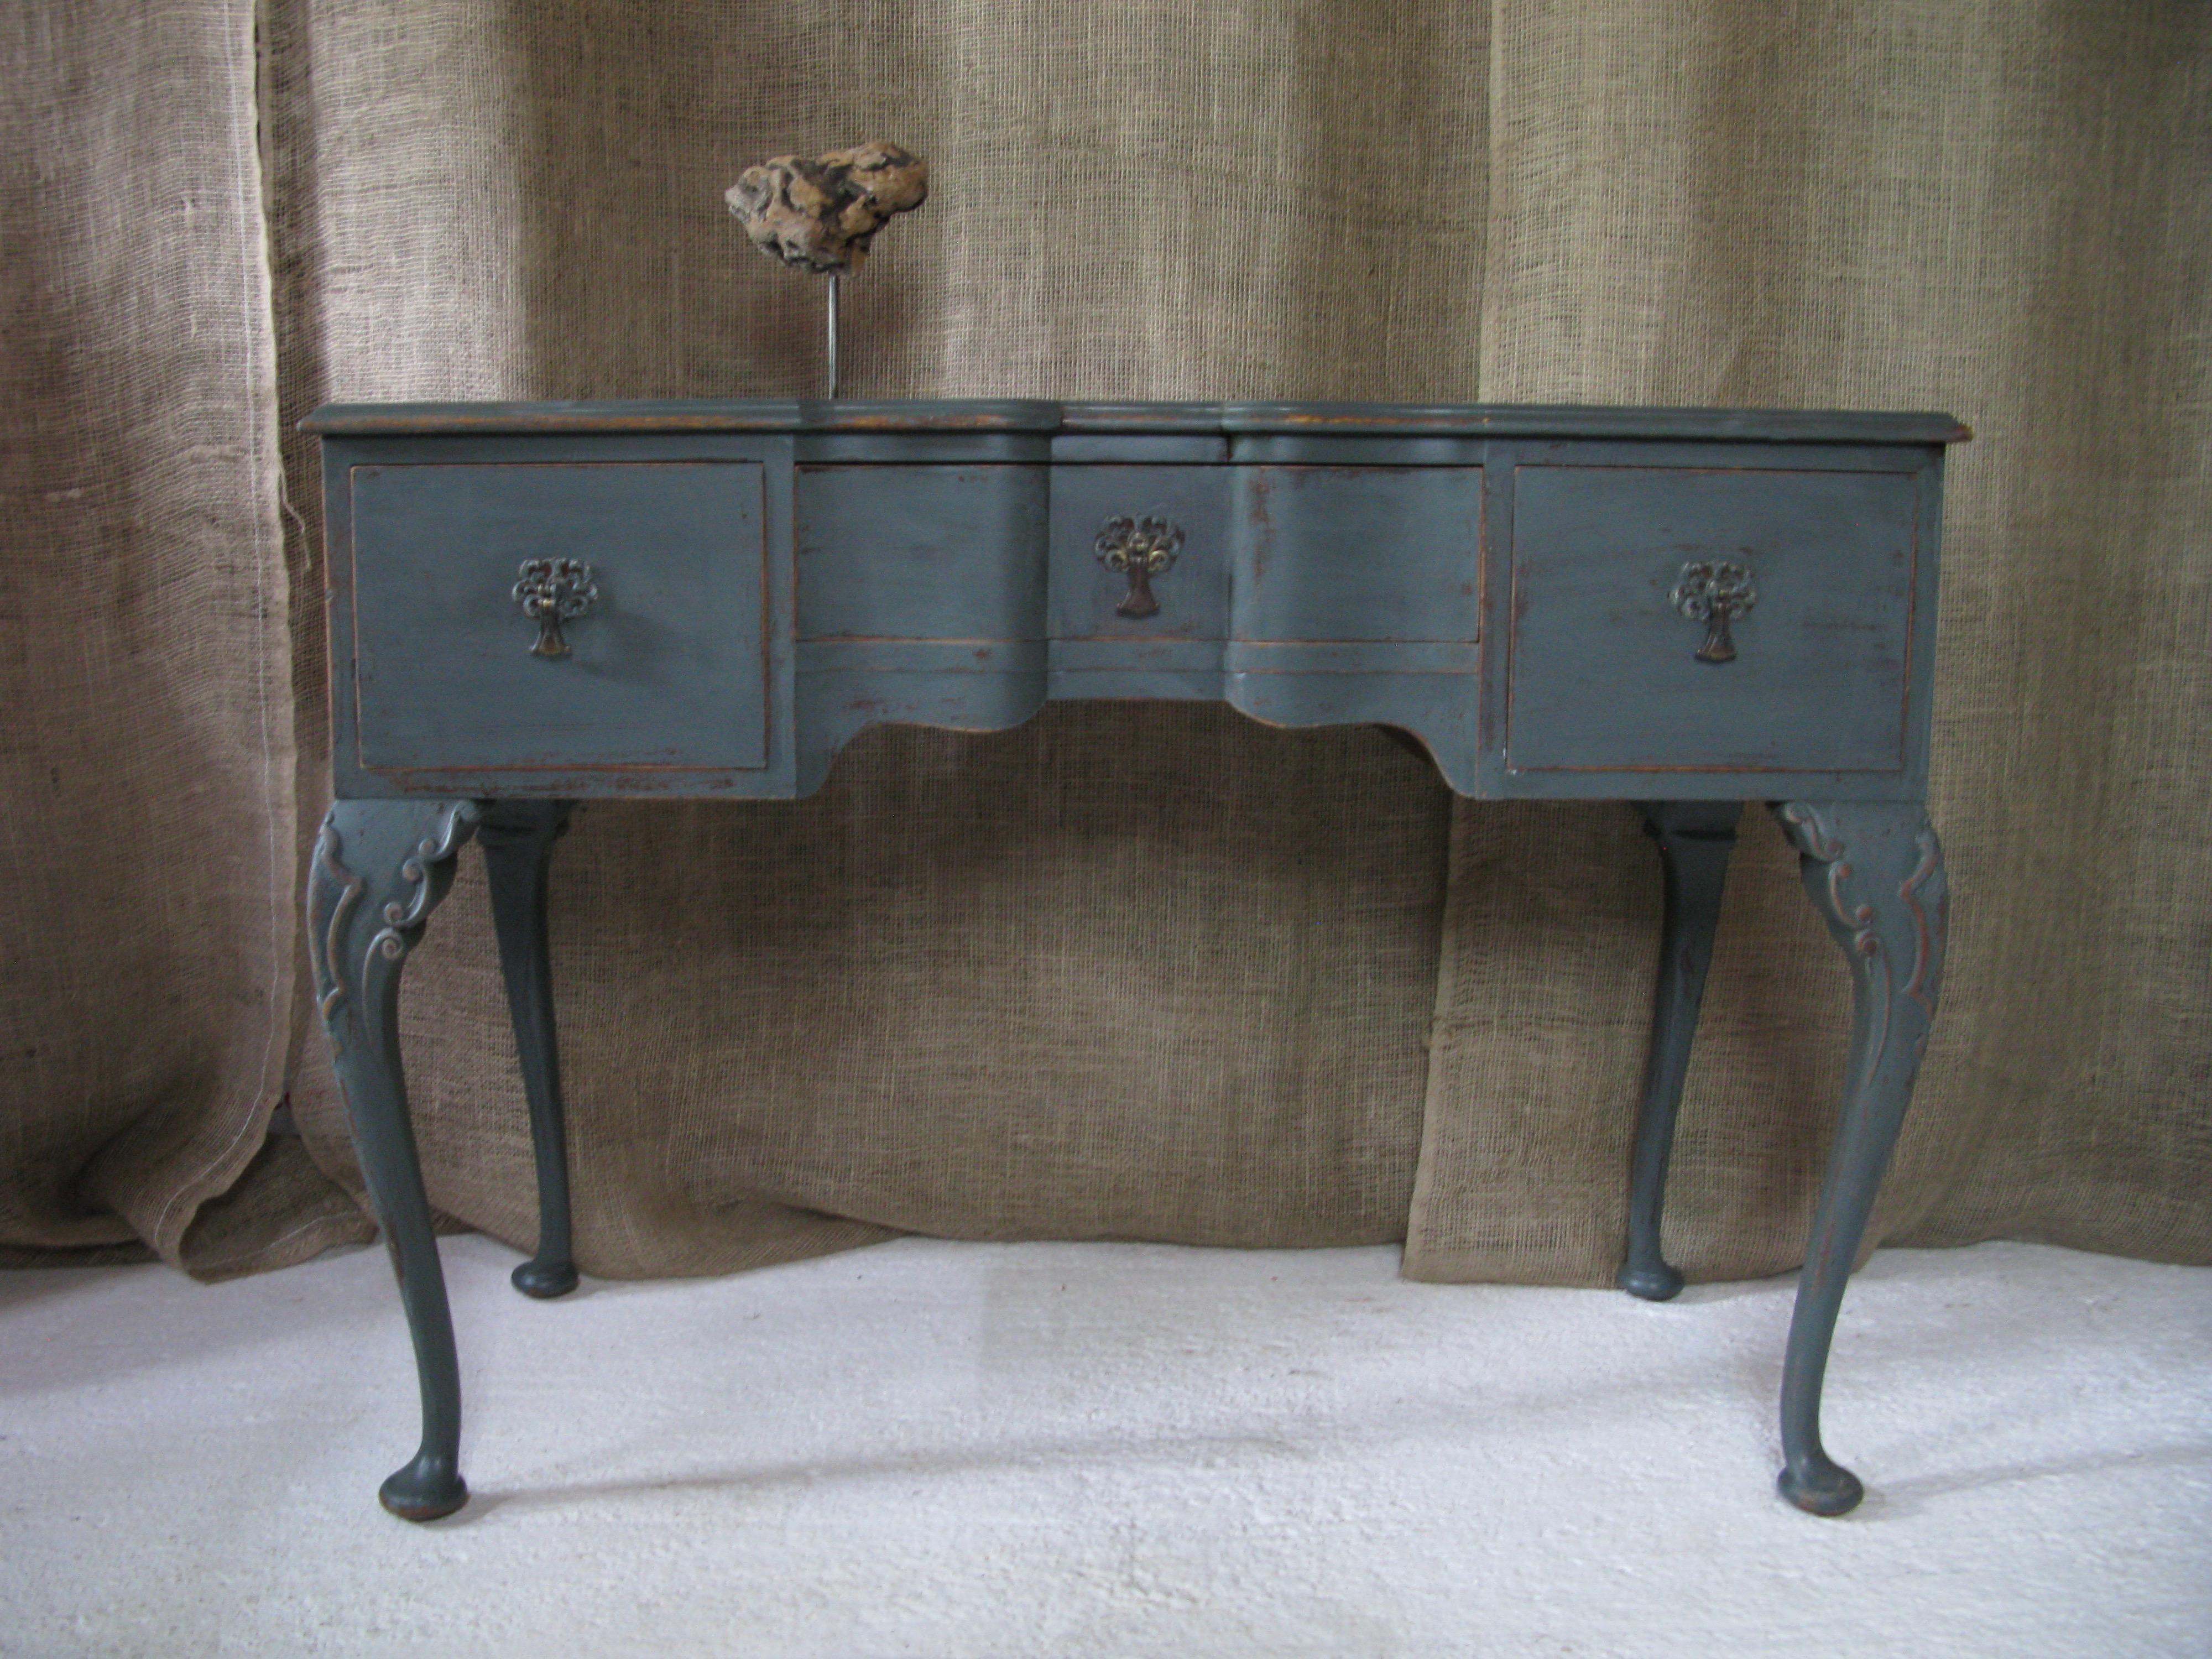 Cold-Painted Italian Style, Writing Table, Antique Small Writing Table, English Writing Table